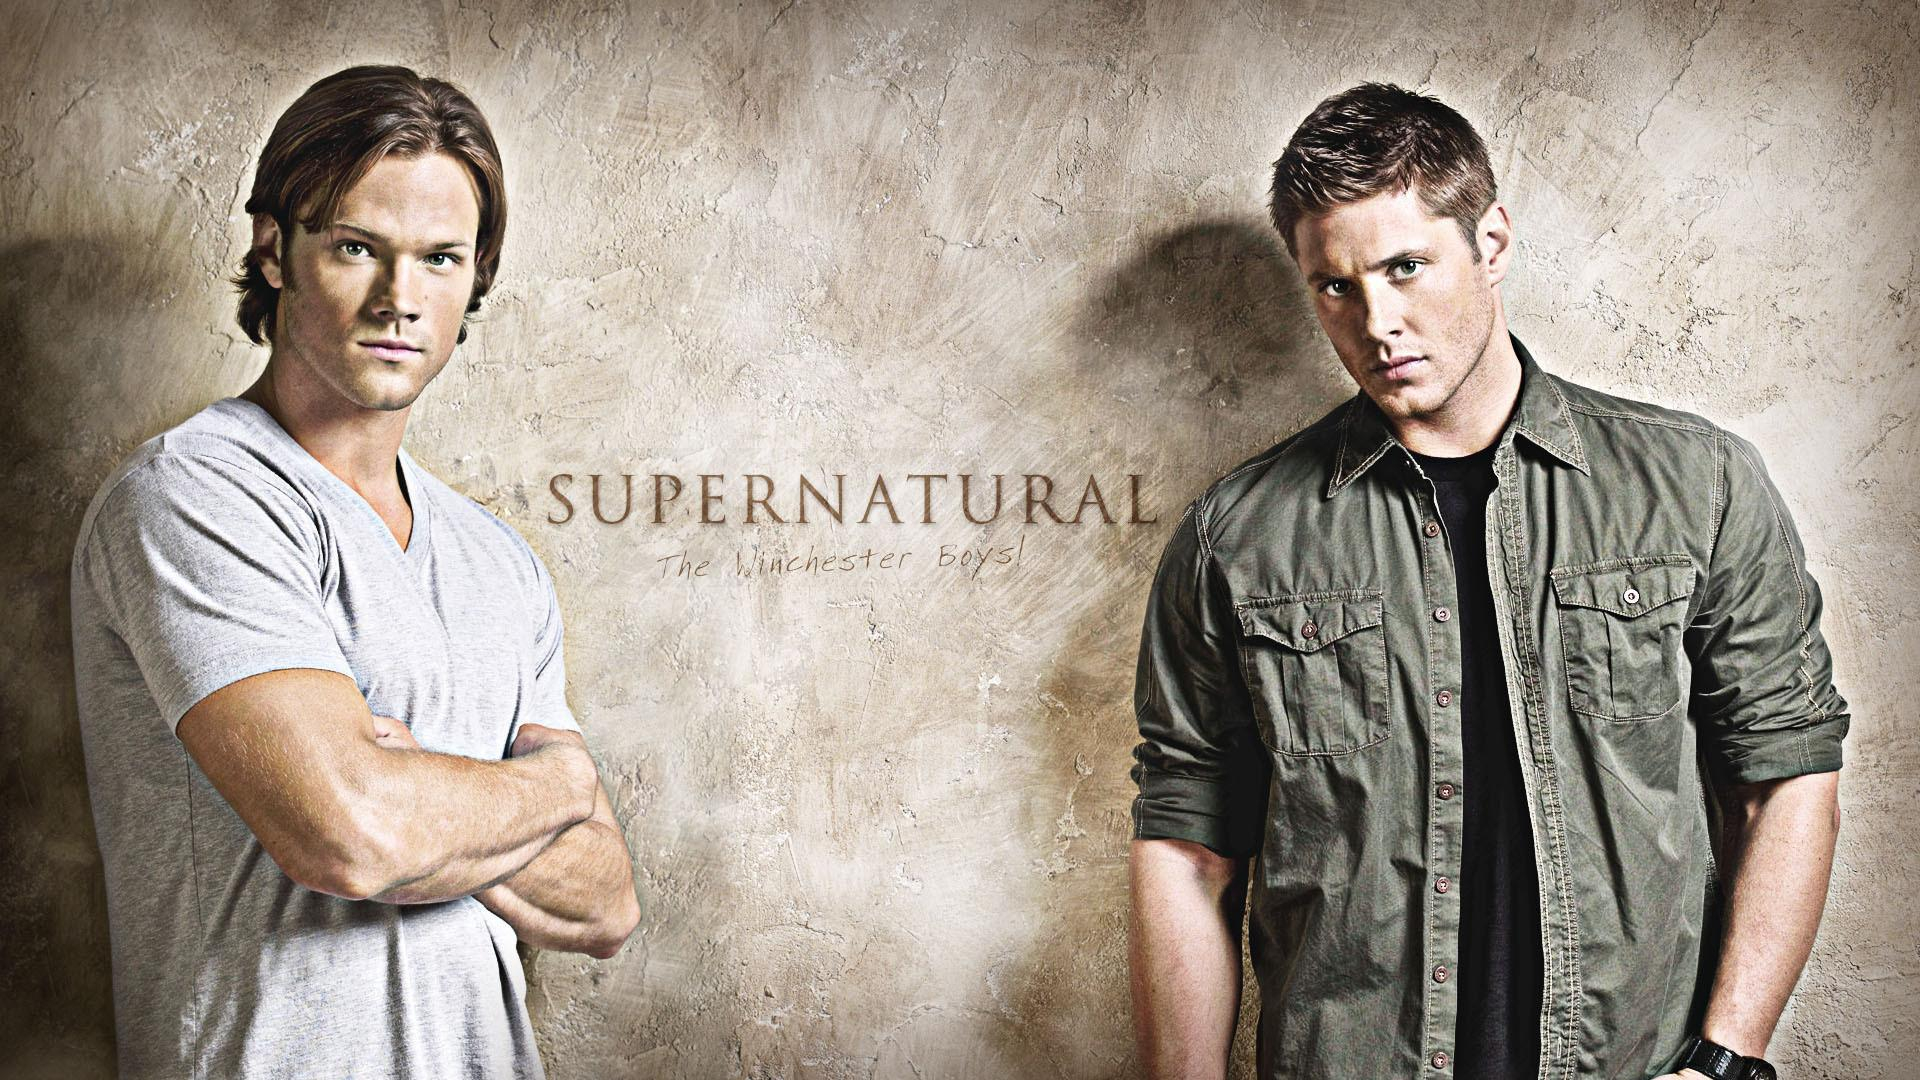 1920x1080 Sam and Dean Winchester Wallpapers Top Free Sam and Dean Winchester Backgrounds